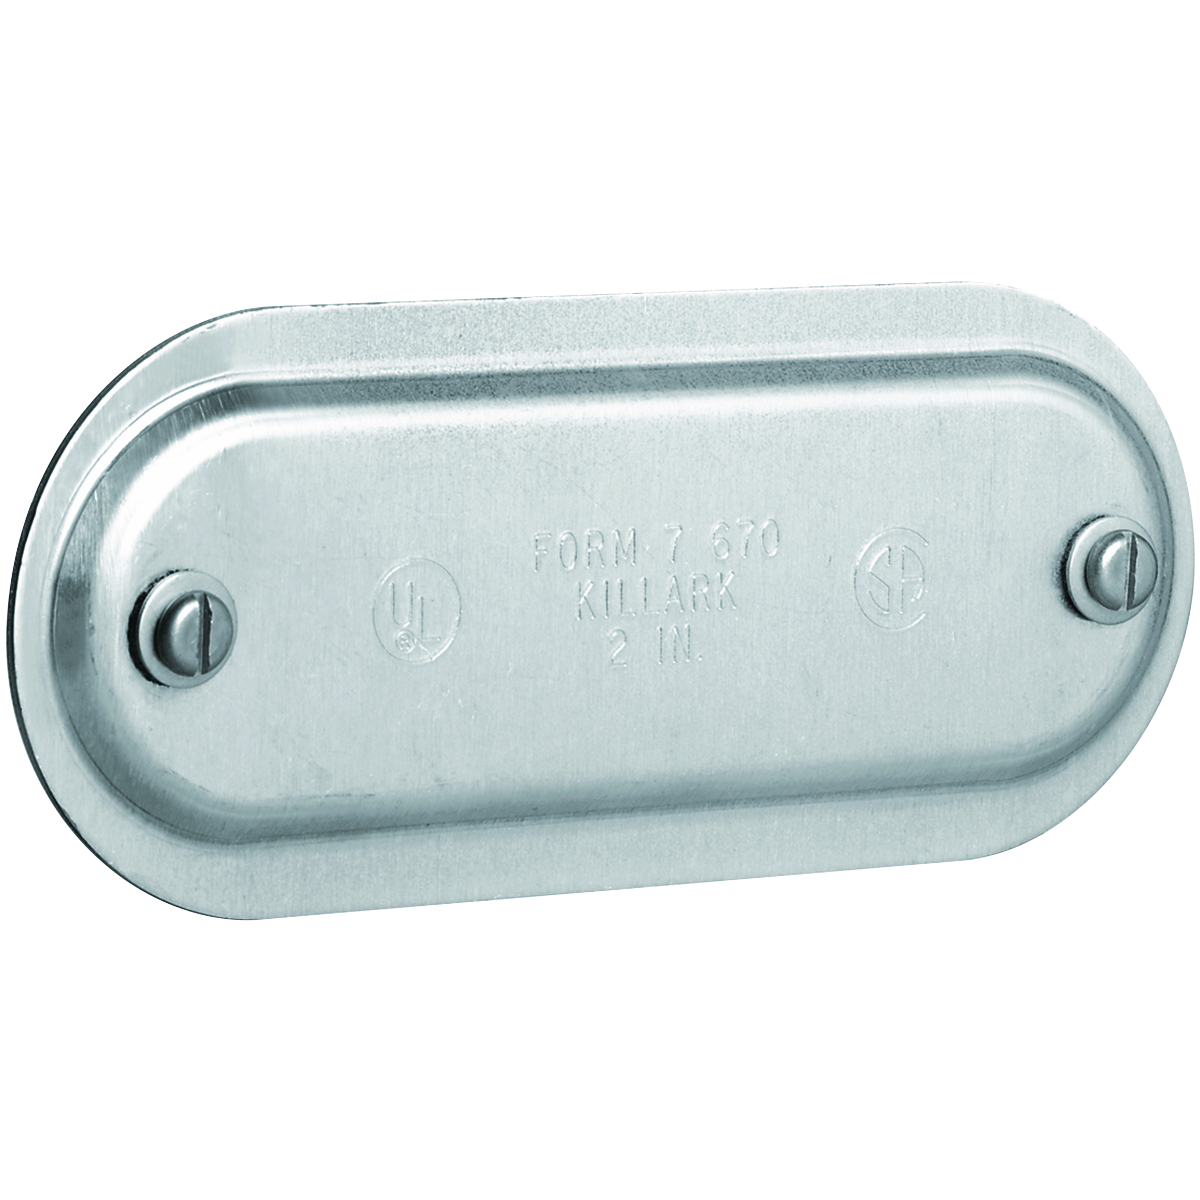 DURALOY 7 SERIES - STAMPED STEEL CONDUIT BODY COVER - HUB SIZE 2 INCH